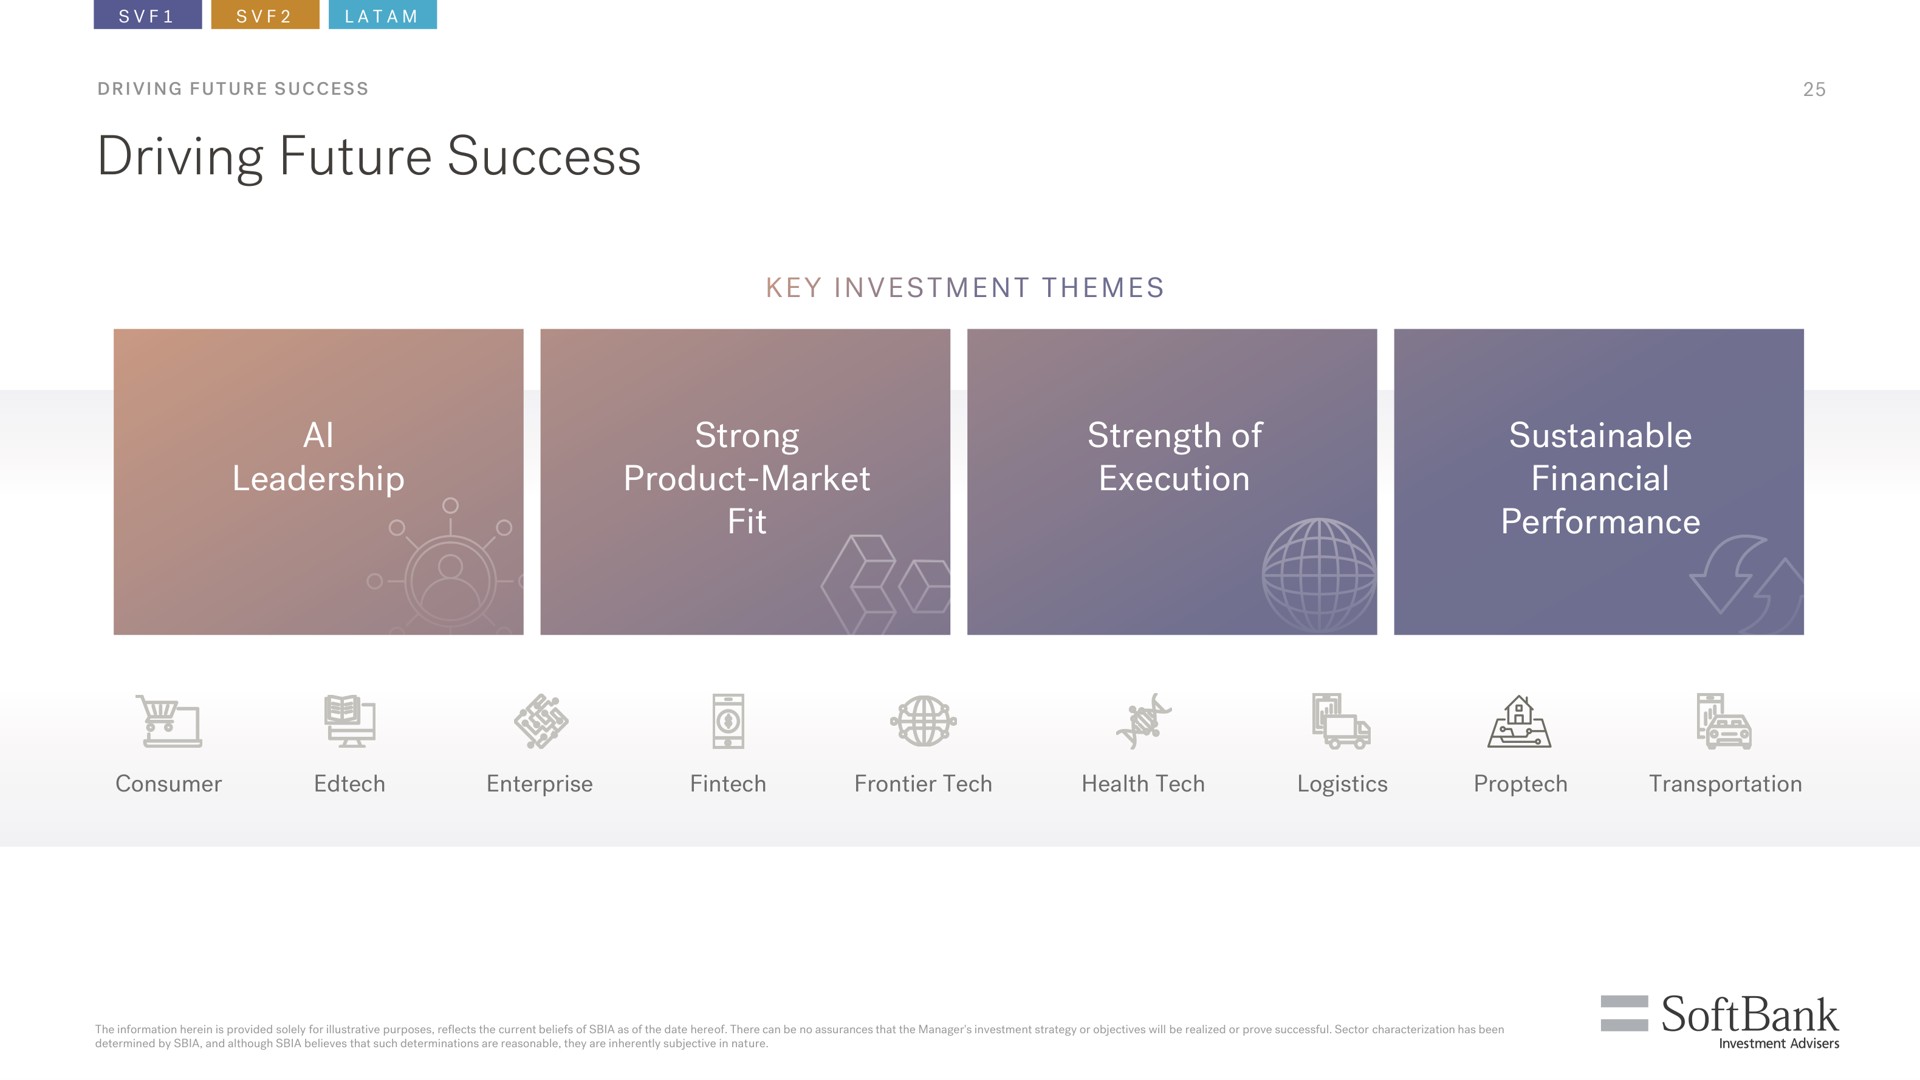 driving future success i leadership strong product market fit strength of execution sustainable financial performance an | SoftBank